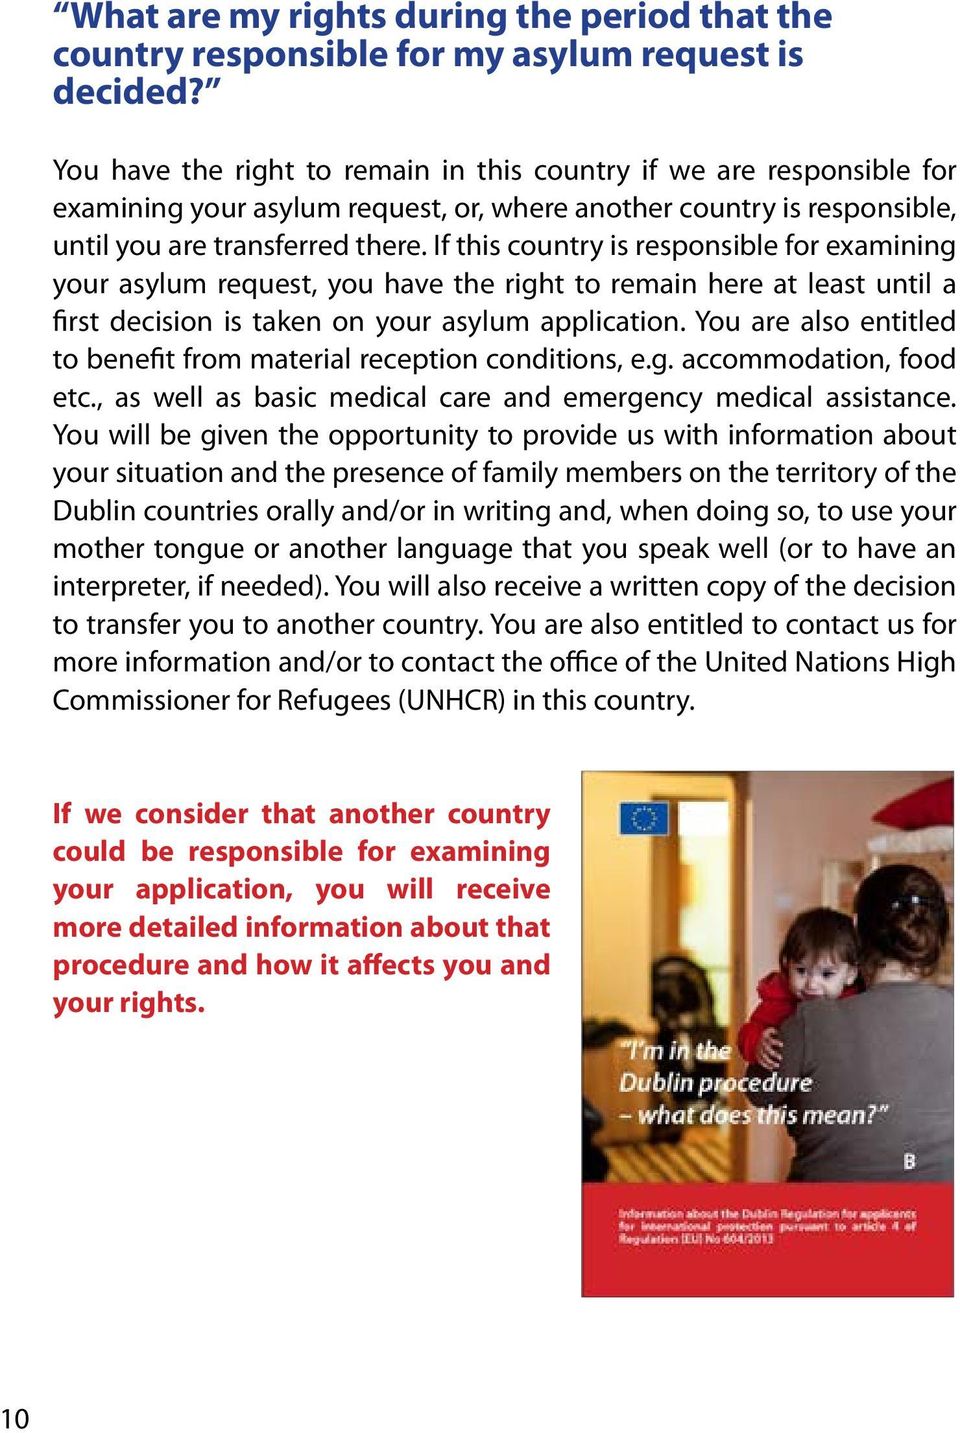 If this country is responsible for examining your asylum request, you have the right to remain here at least until a first decision is taken on your asylum application.